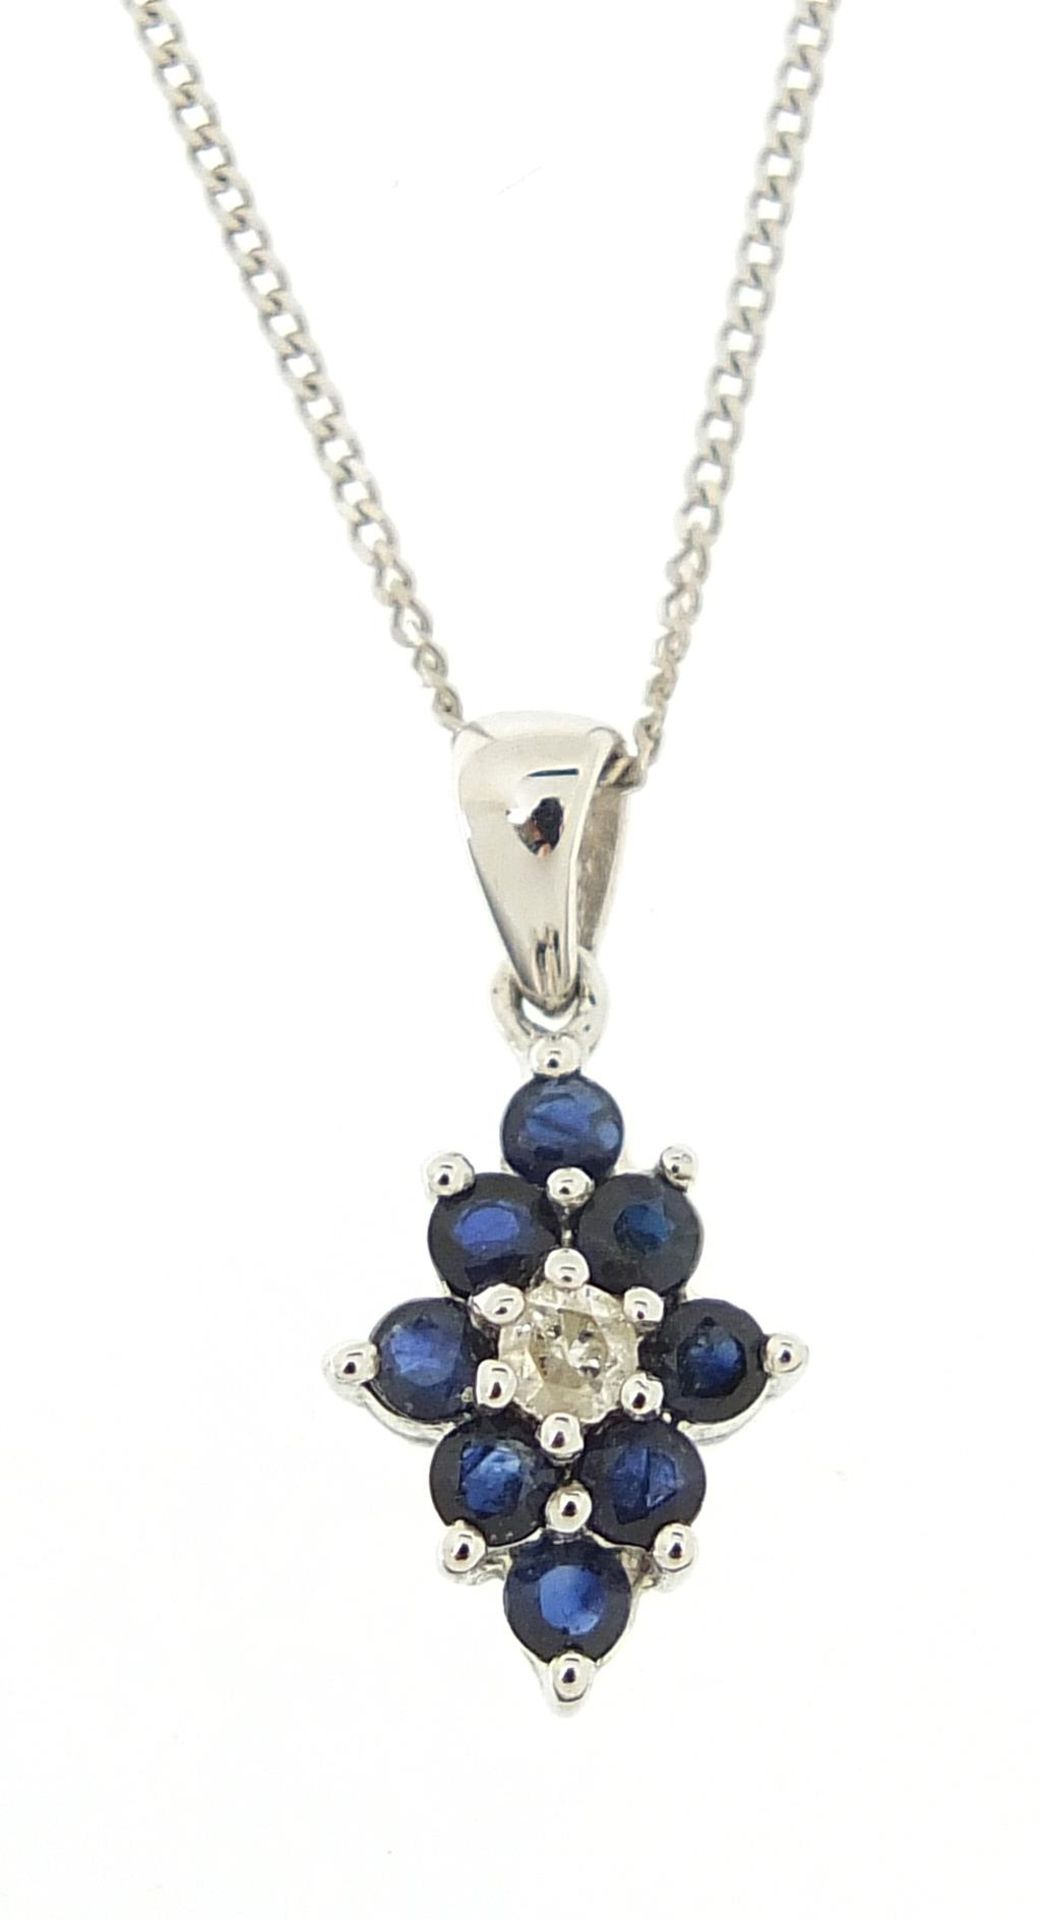 9ct white gold sapphire and diamond pendant on a 9ct white gold necklace, 1.5cm high and 45cm in